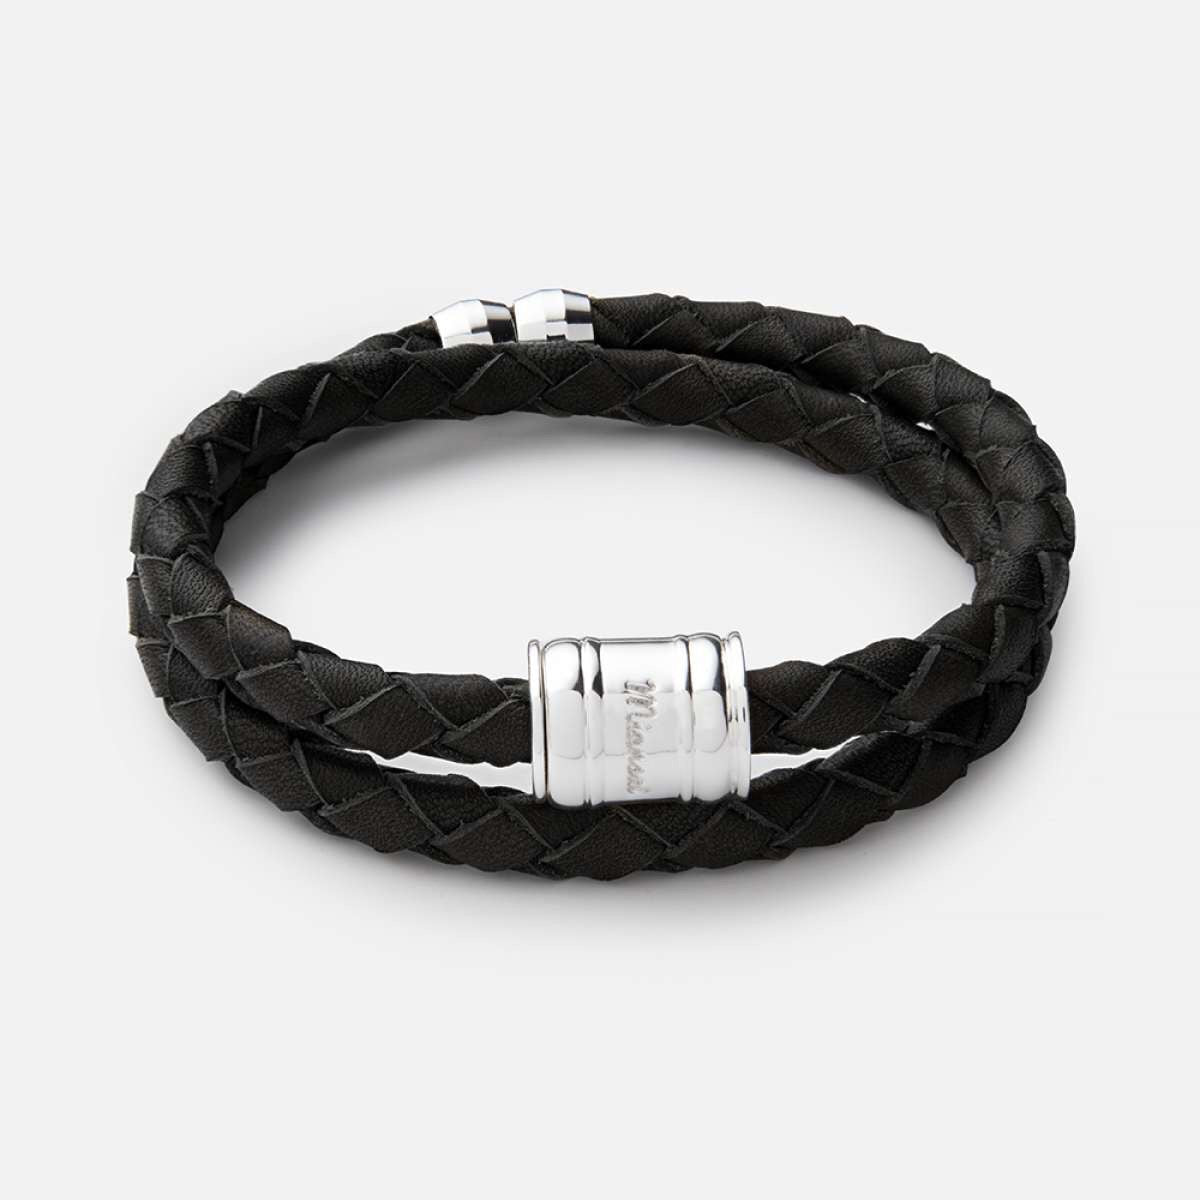 Miansai Black Braided leather Bracelet with Sterling Closure